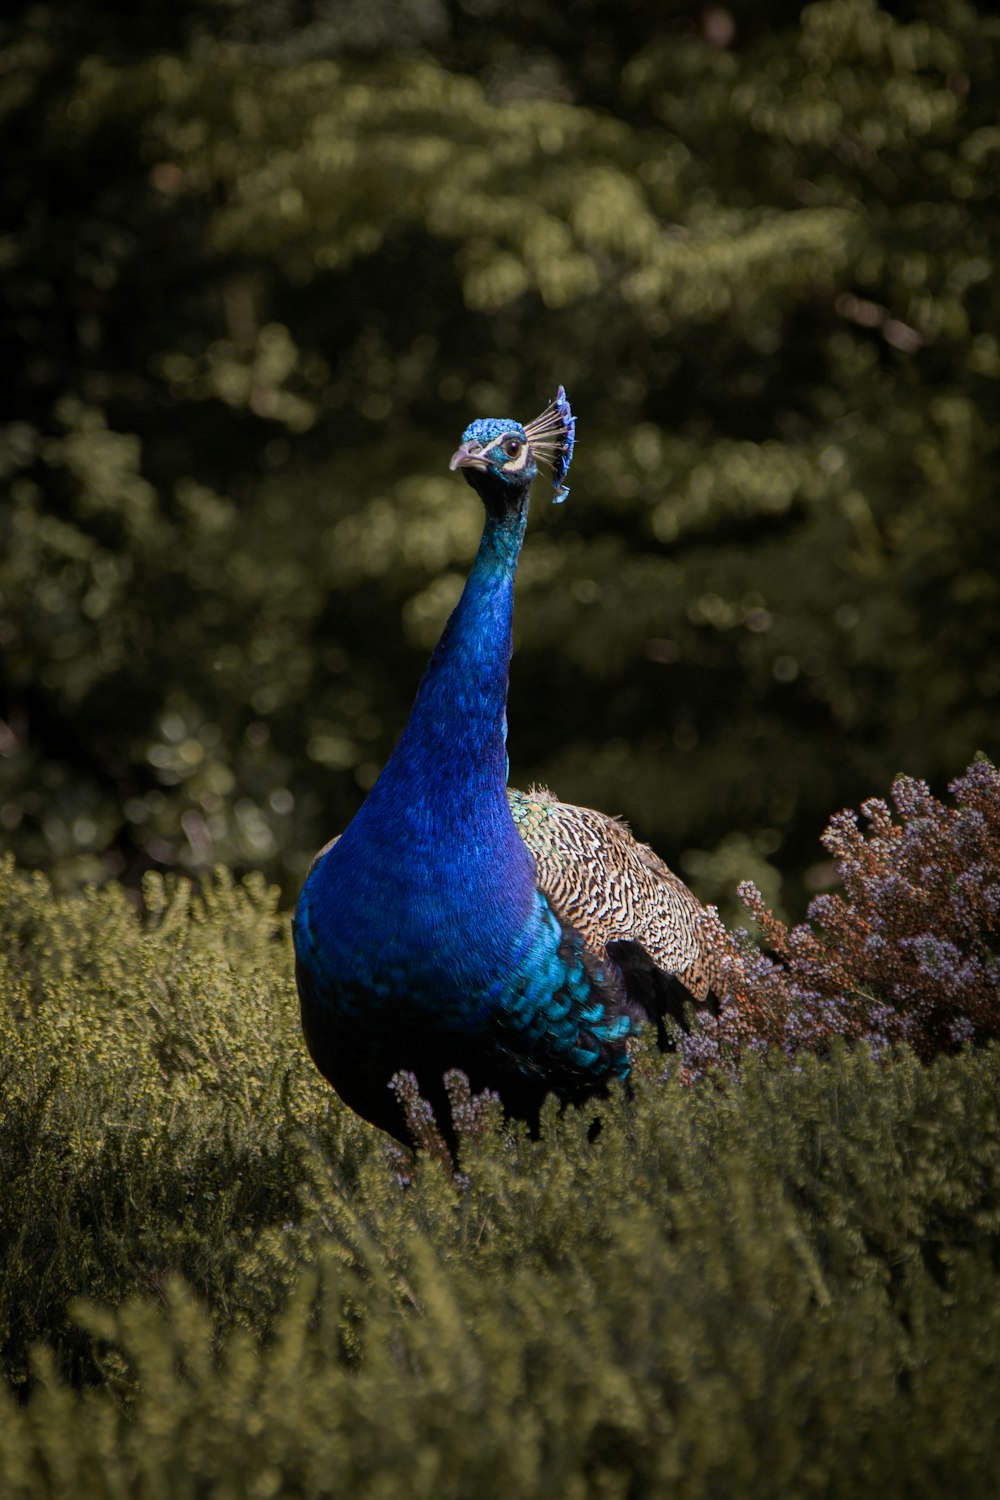 a blue peacock standing in a field of tall grass